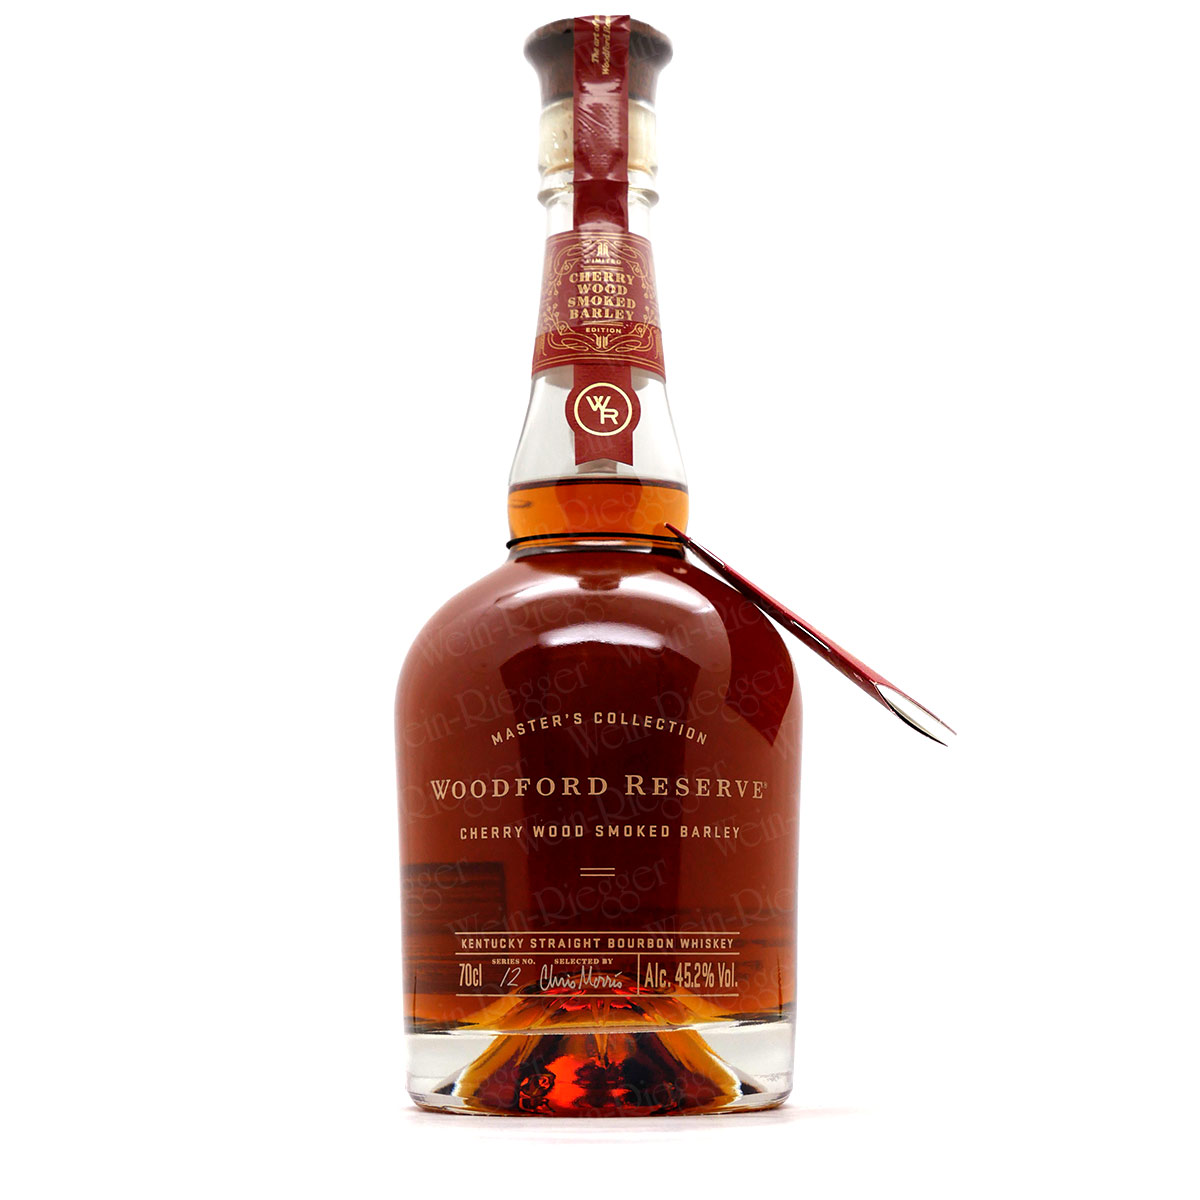 Cherry Wood Smoked Barley | Woodford Reserve Master's Collection - Kentucky Straight Bourbon Whiskey